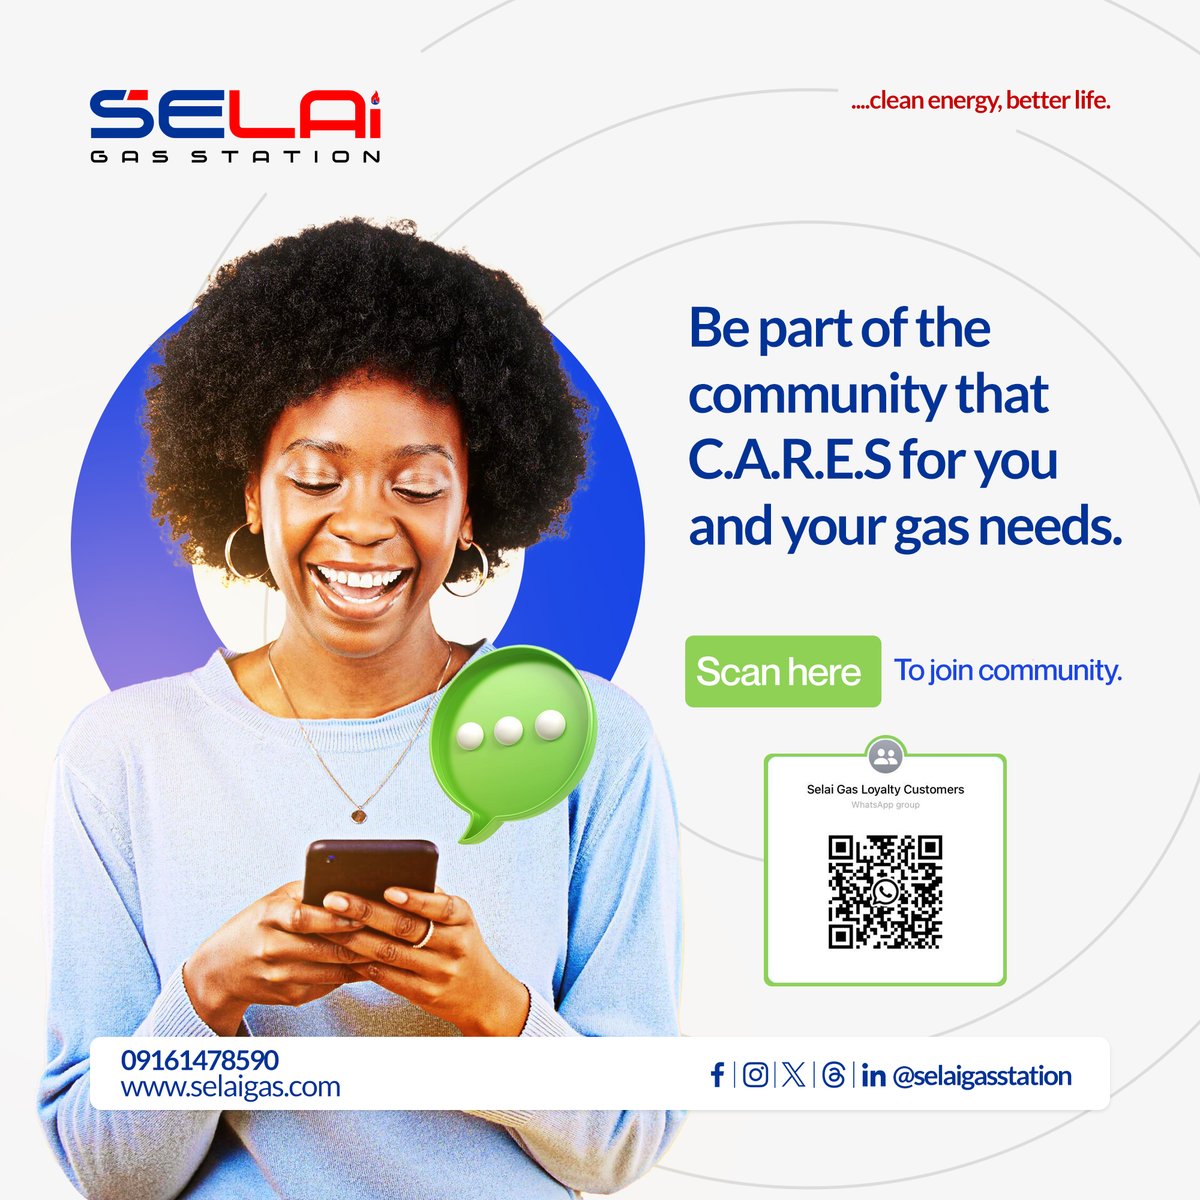 Be part of our WhatsApp community for exclusive access to clean energy tips, special offers, and a community that cares.   

Scan barcode to join.

#SelaiCommunty #SelaiGasStation #QualityGas #PremiumGas